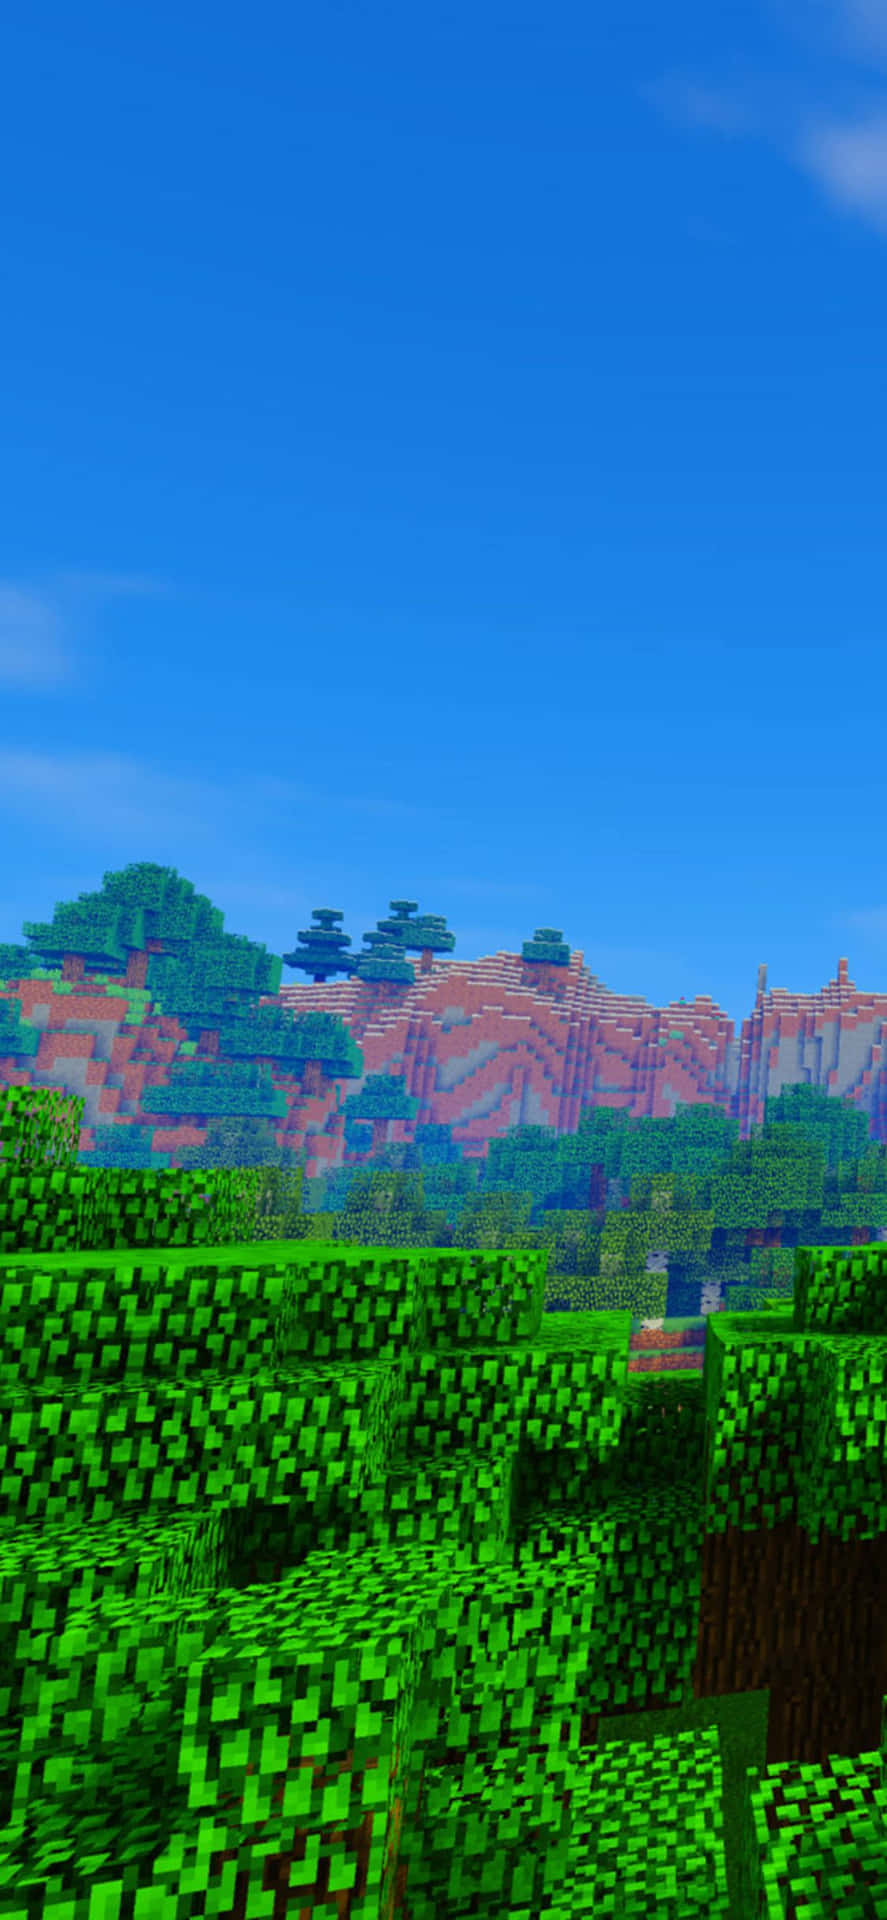 Enter a World of Enchantment with Iphone Xs and Minecraft